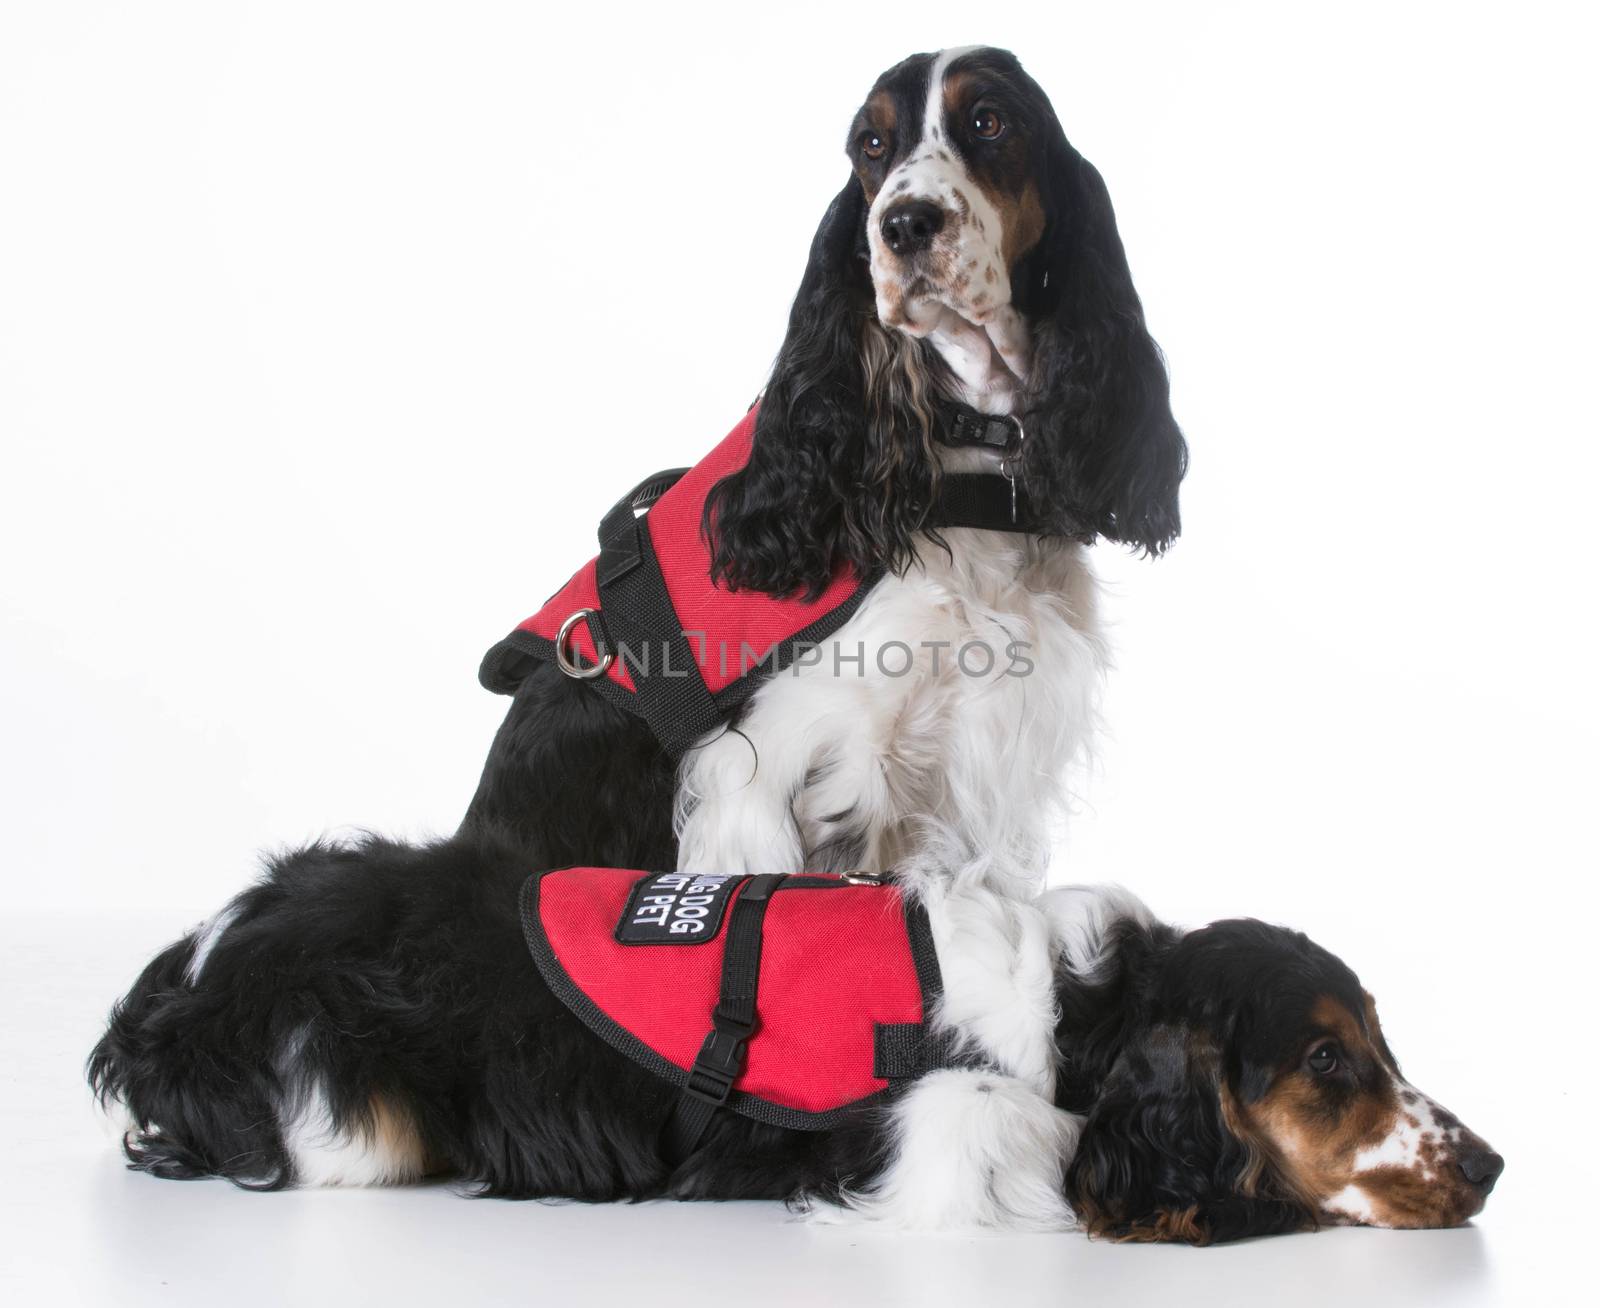 service dogs - two english cocker spaniels wearing vests on white background